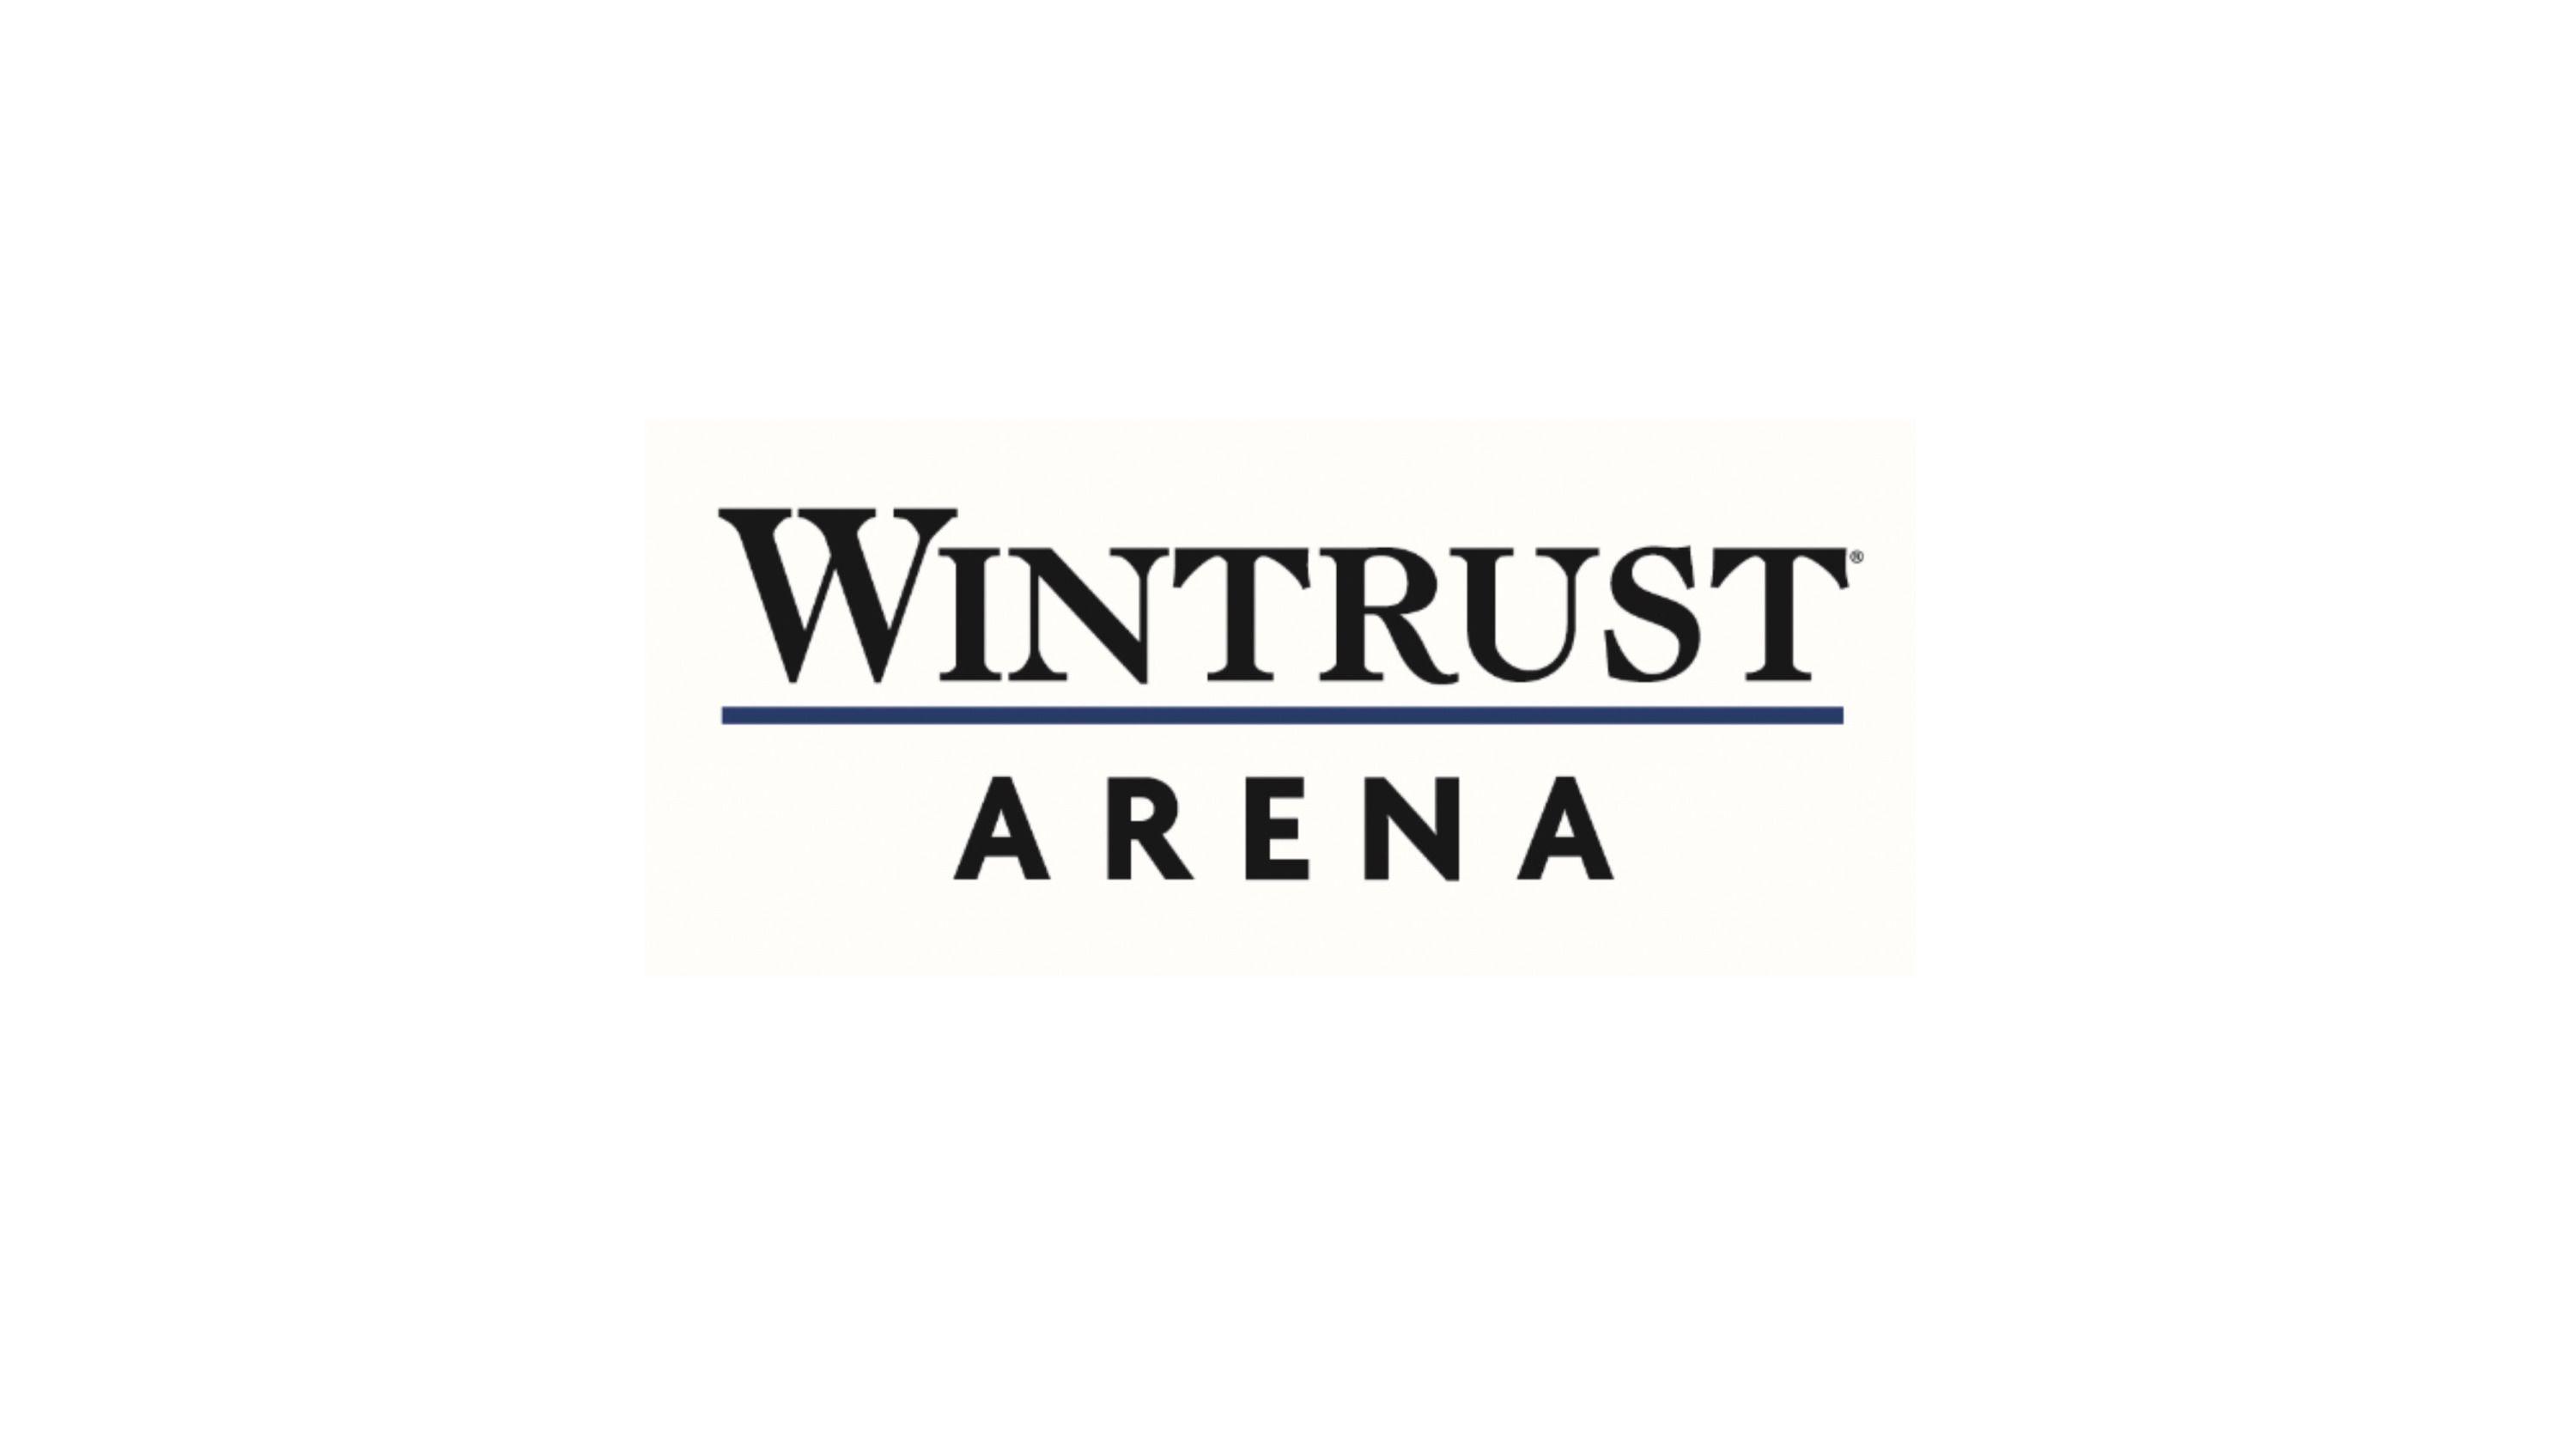 Wintrust Logo - Event Center at McCormick Square to be named Wintrust Arena - DePaul ...